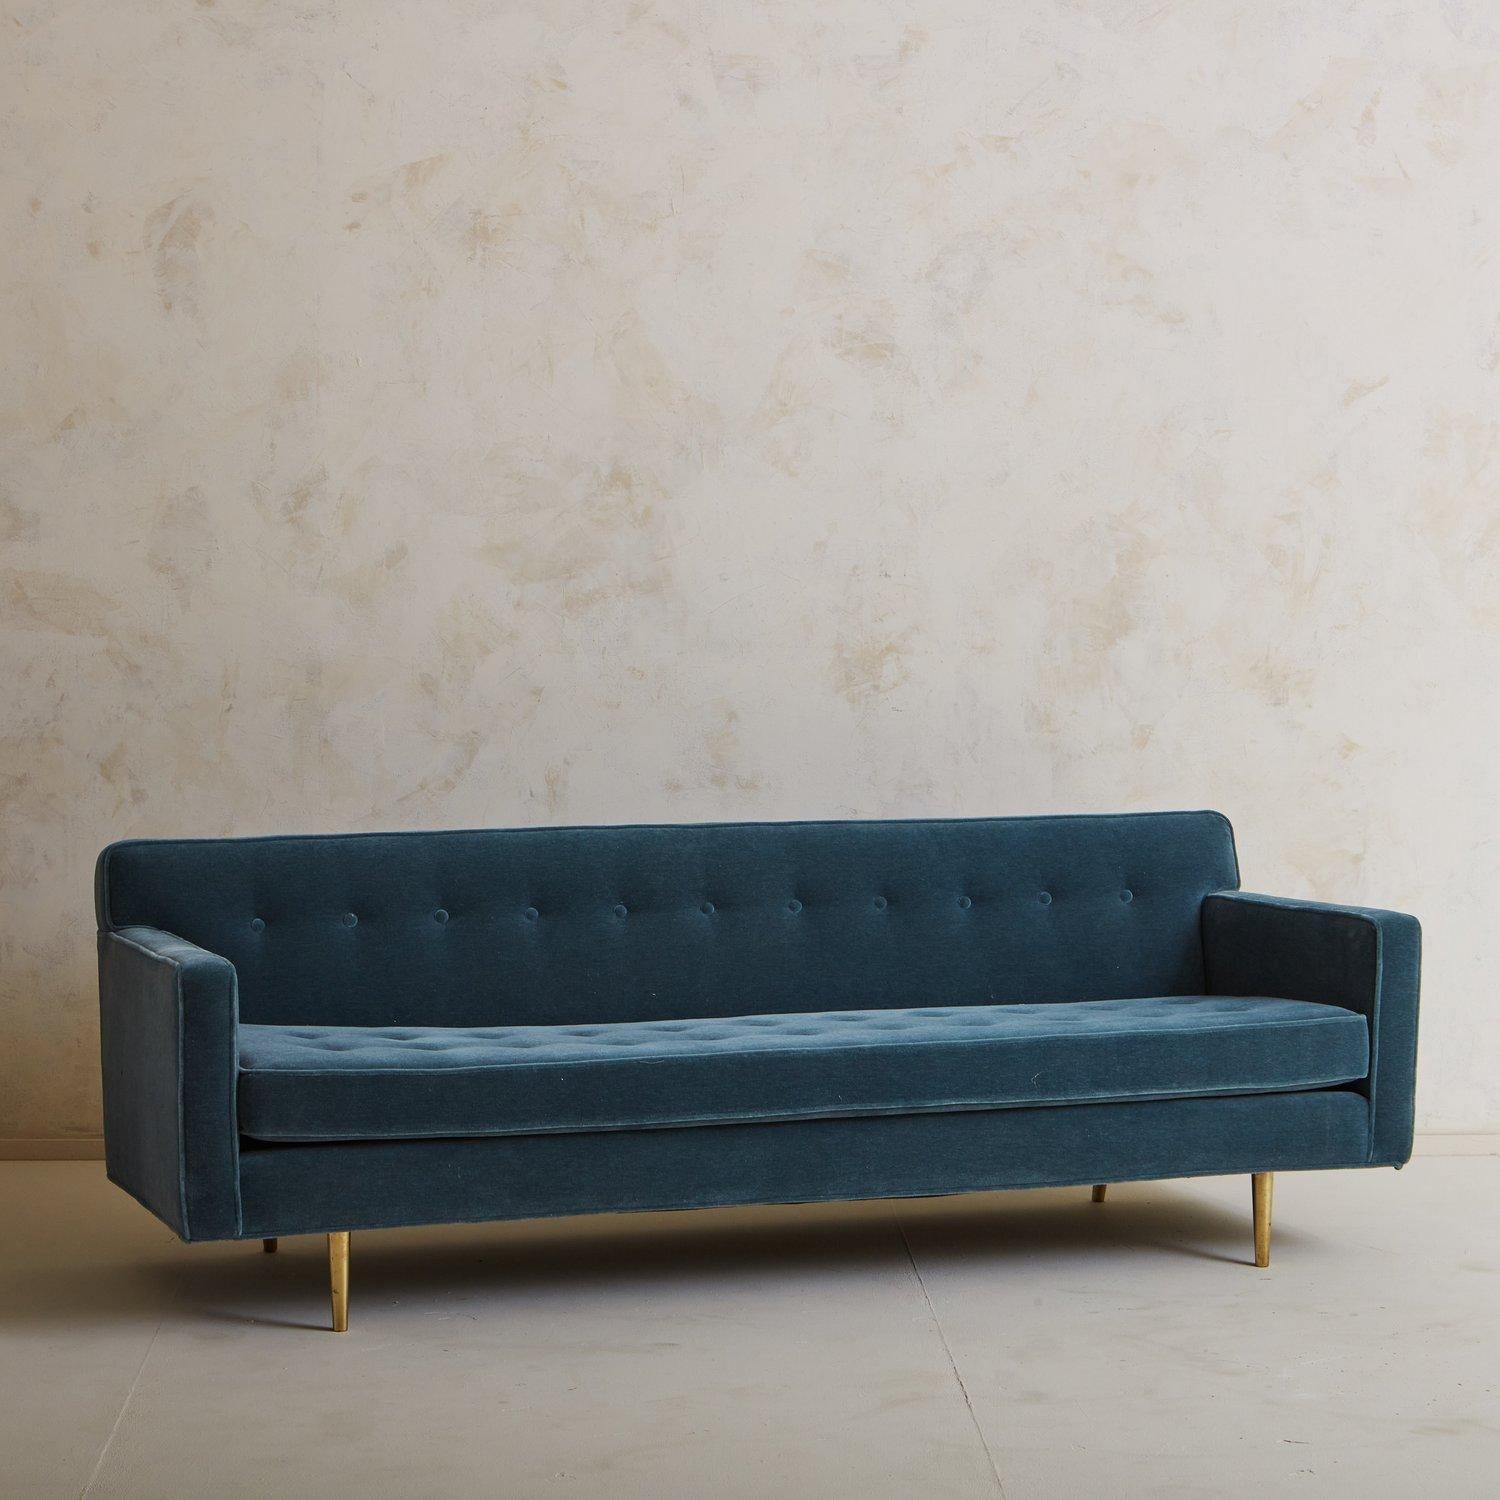 A Mid Century sofa attributed to Edward Wormley for Dunbar in the 1950s. This piece was reupholstered by previous owners in a beautiful blue mohair and features tufting details on the seat and back. It stands on four tapered brass legs and has a